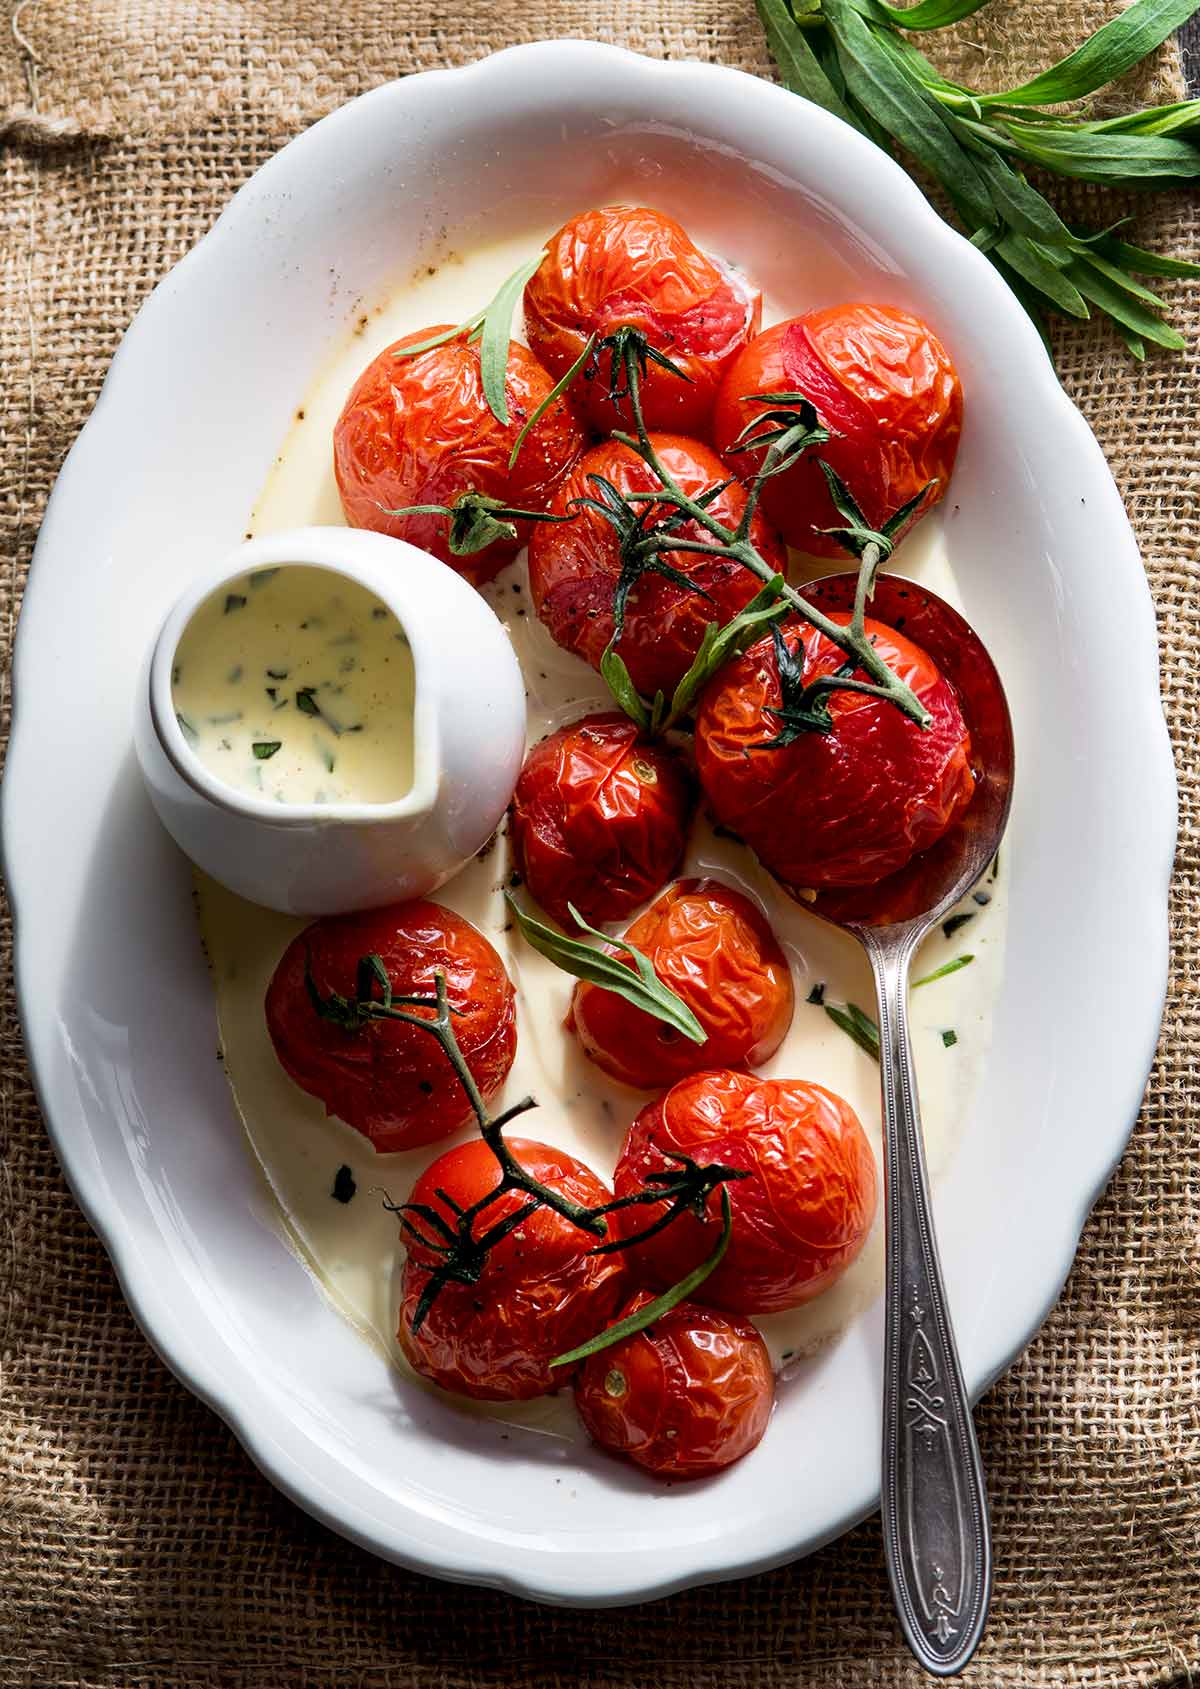 Tarragon cream sauce with roasted tomatoes on a plate.